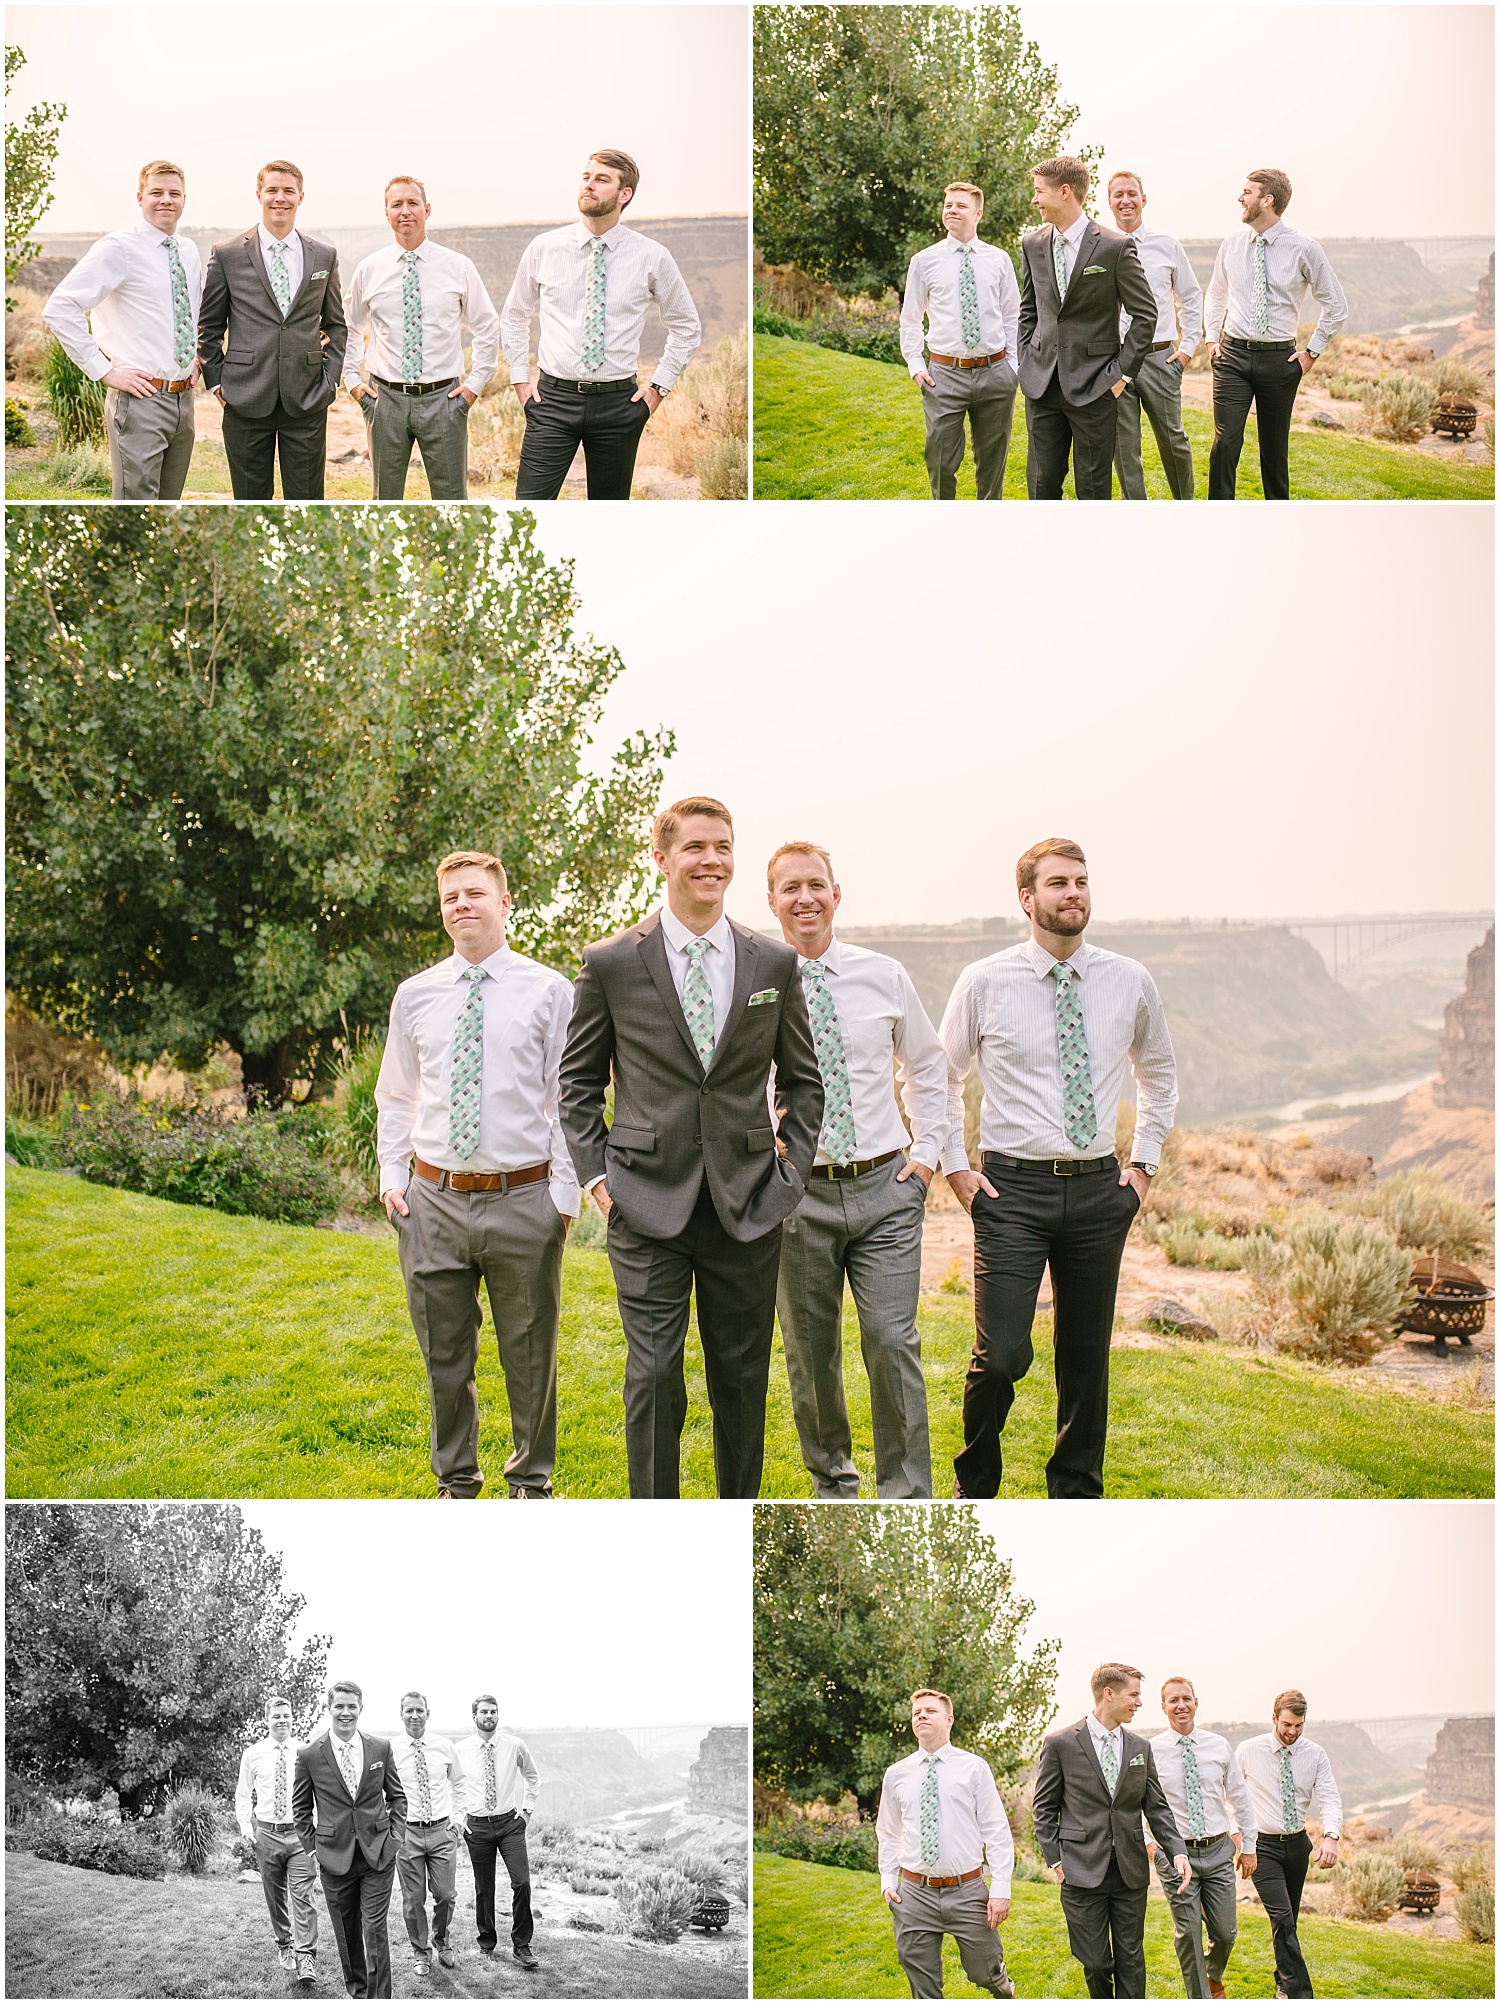 Twin Falls Idaho wedding party pictures overlooking Snake River Canyon